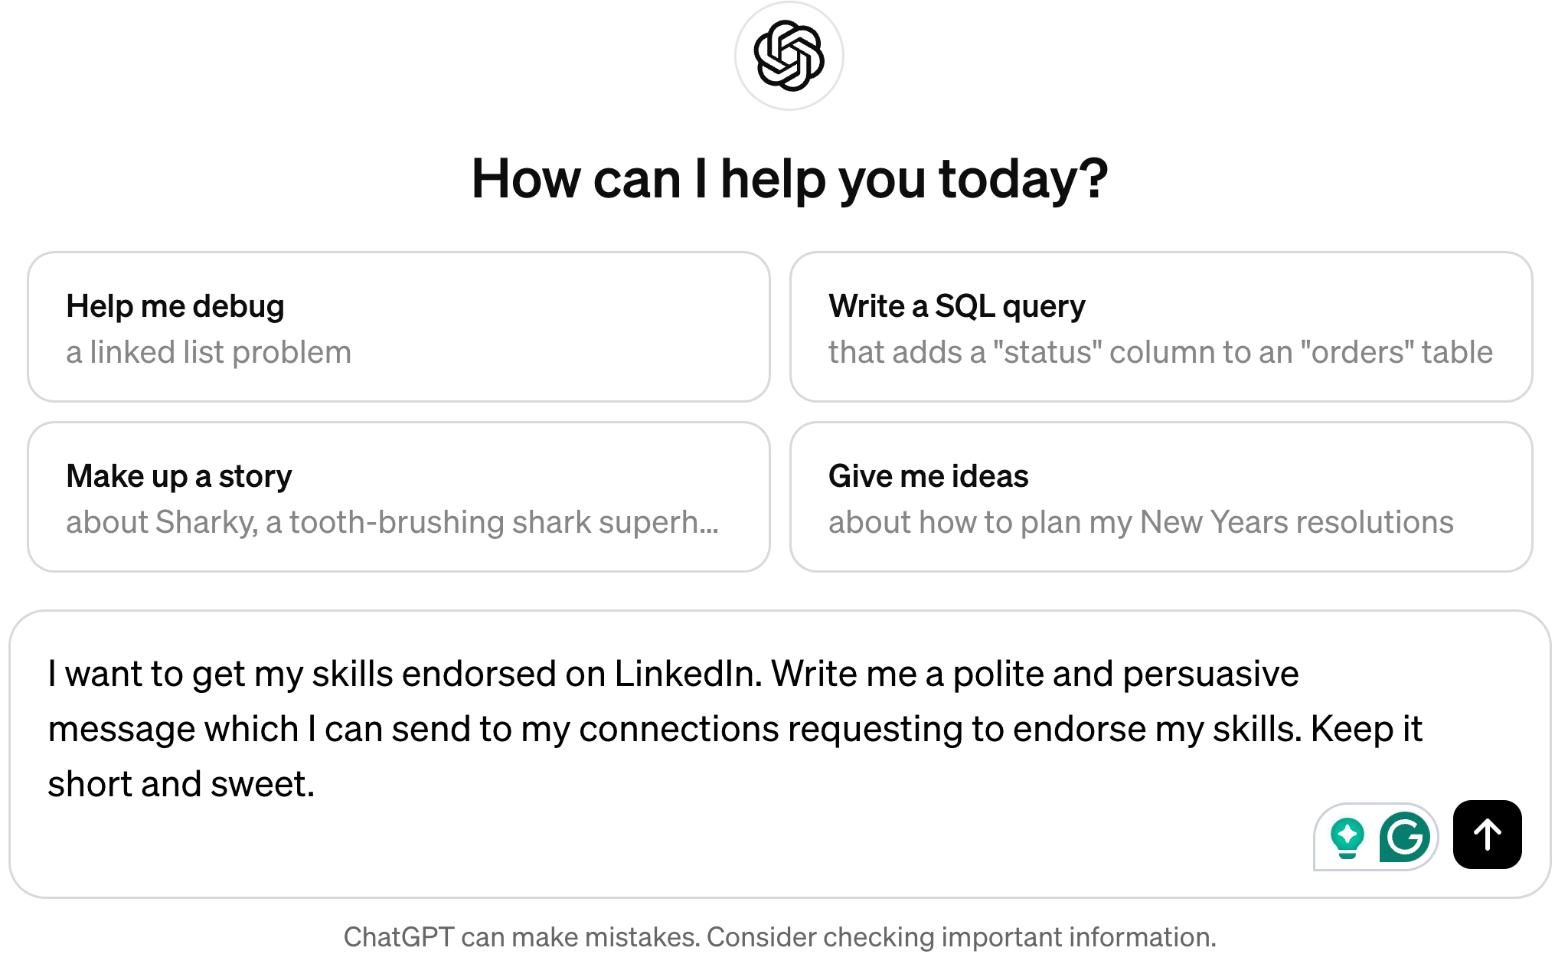 Use AI to help get noticed on LinkedIn